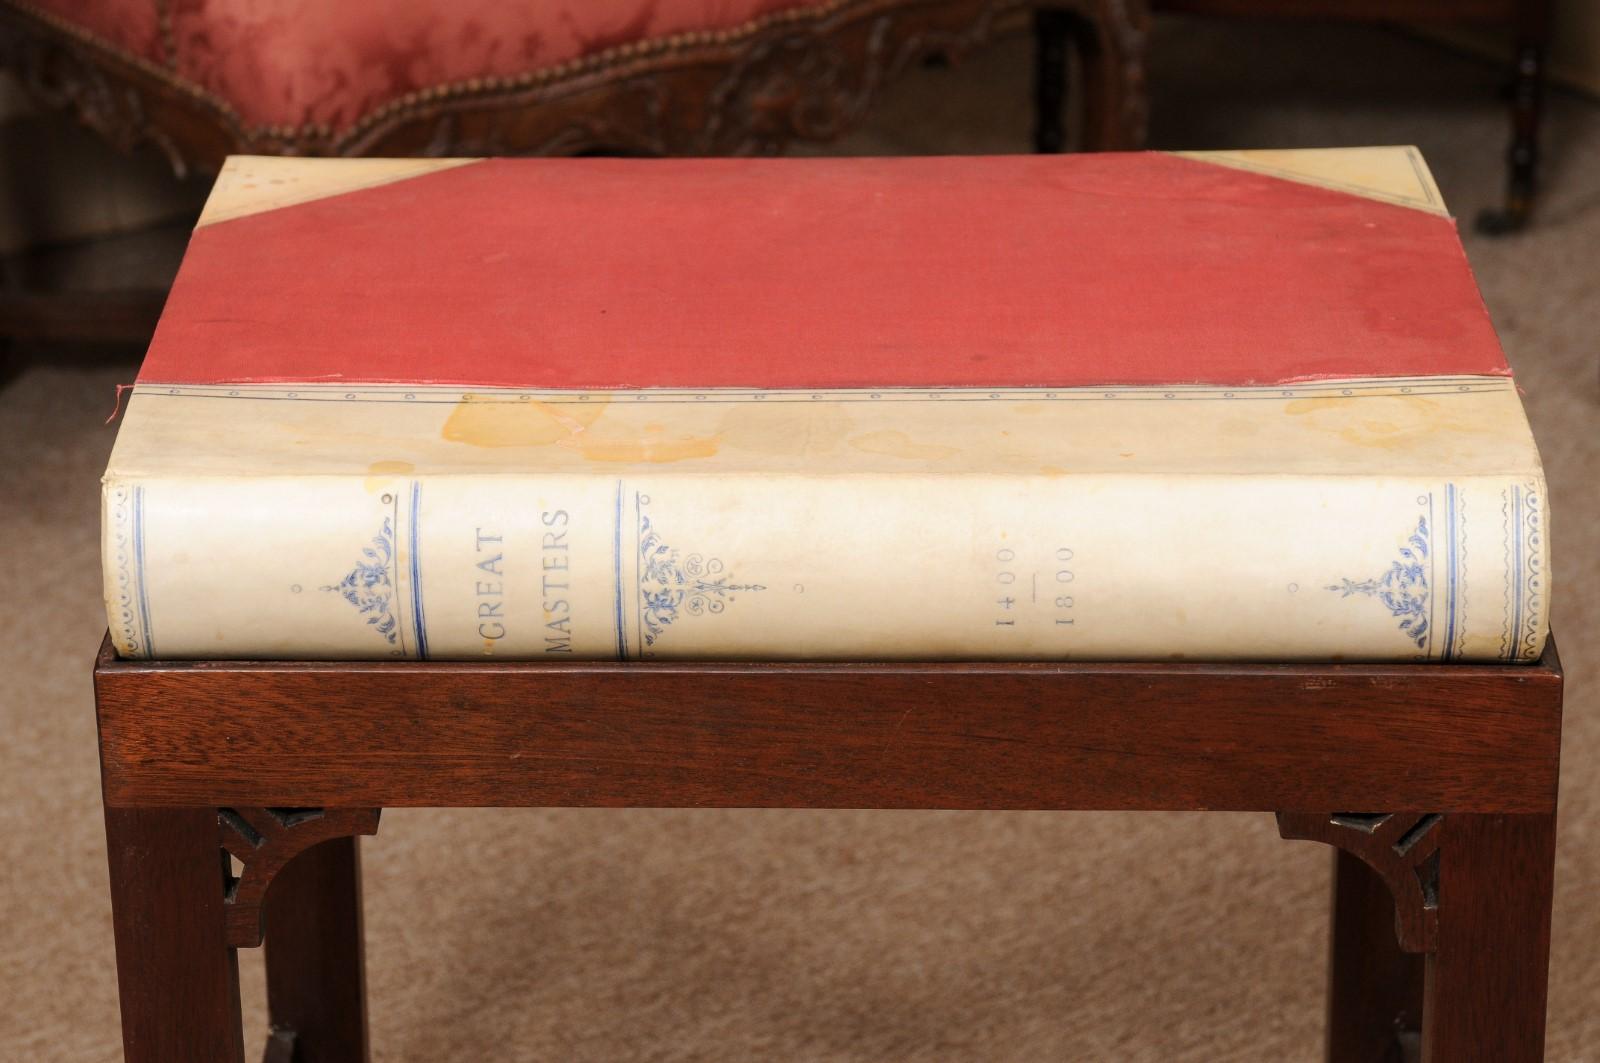 Great Masters 1400-1800 of Art, Book on Stand, Sir Martin Conway dated 1903 For Sale 5